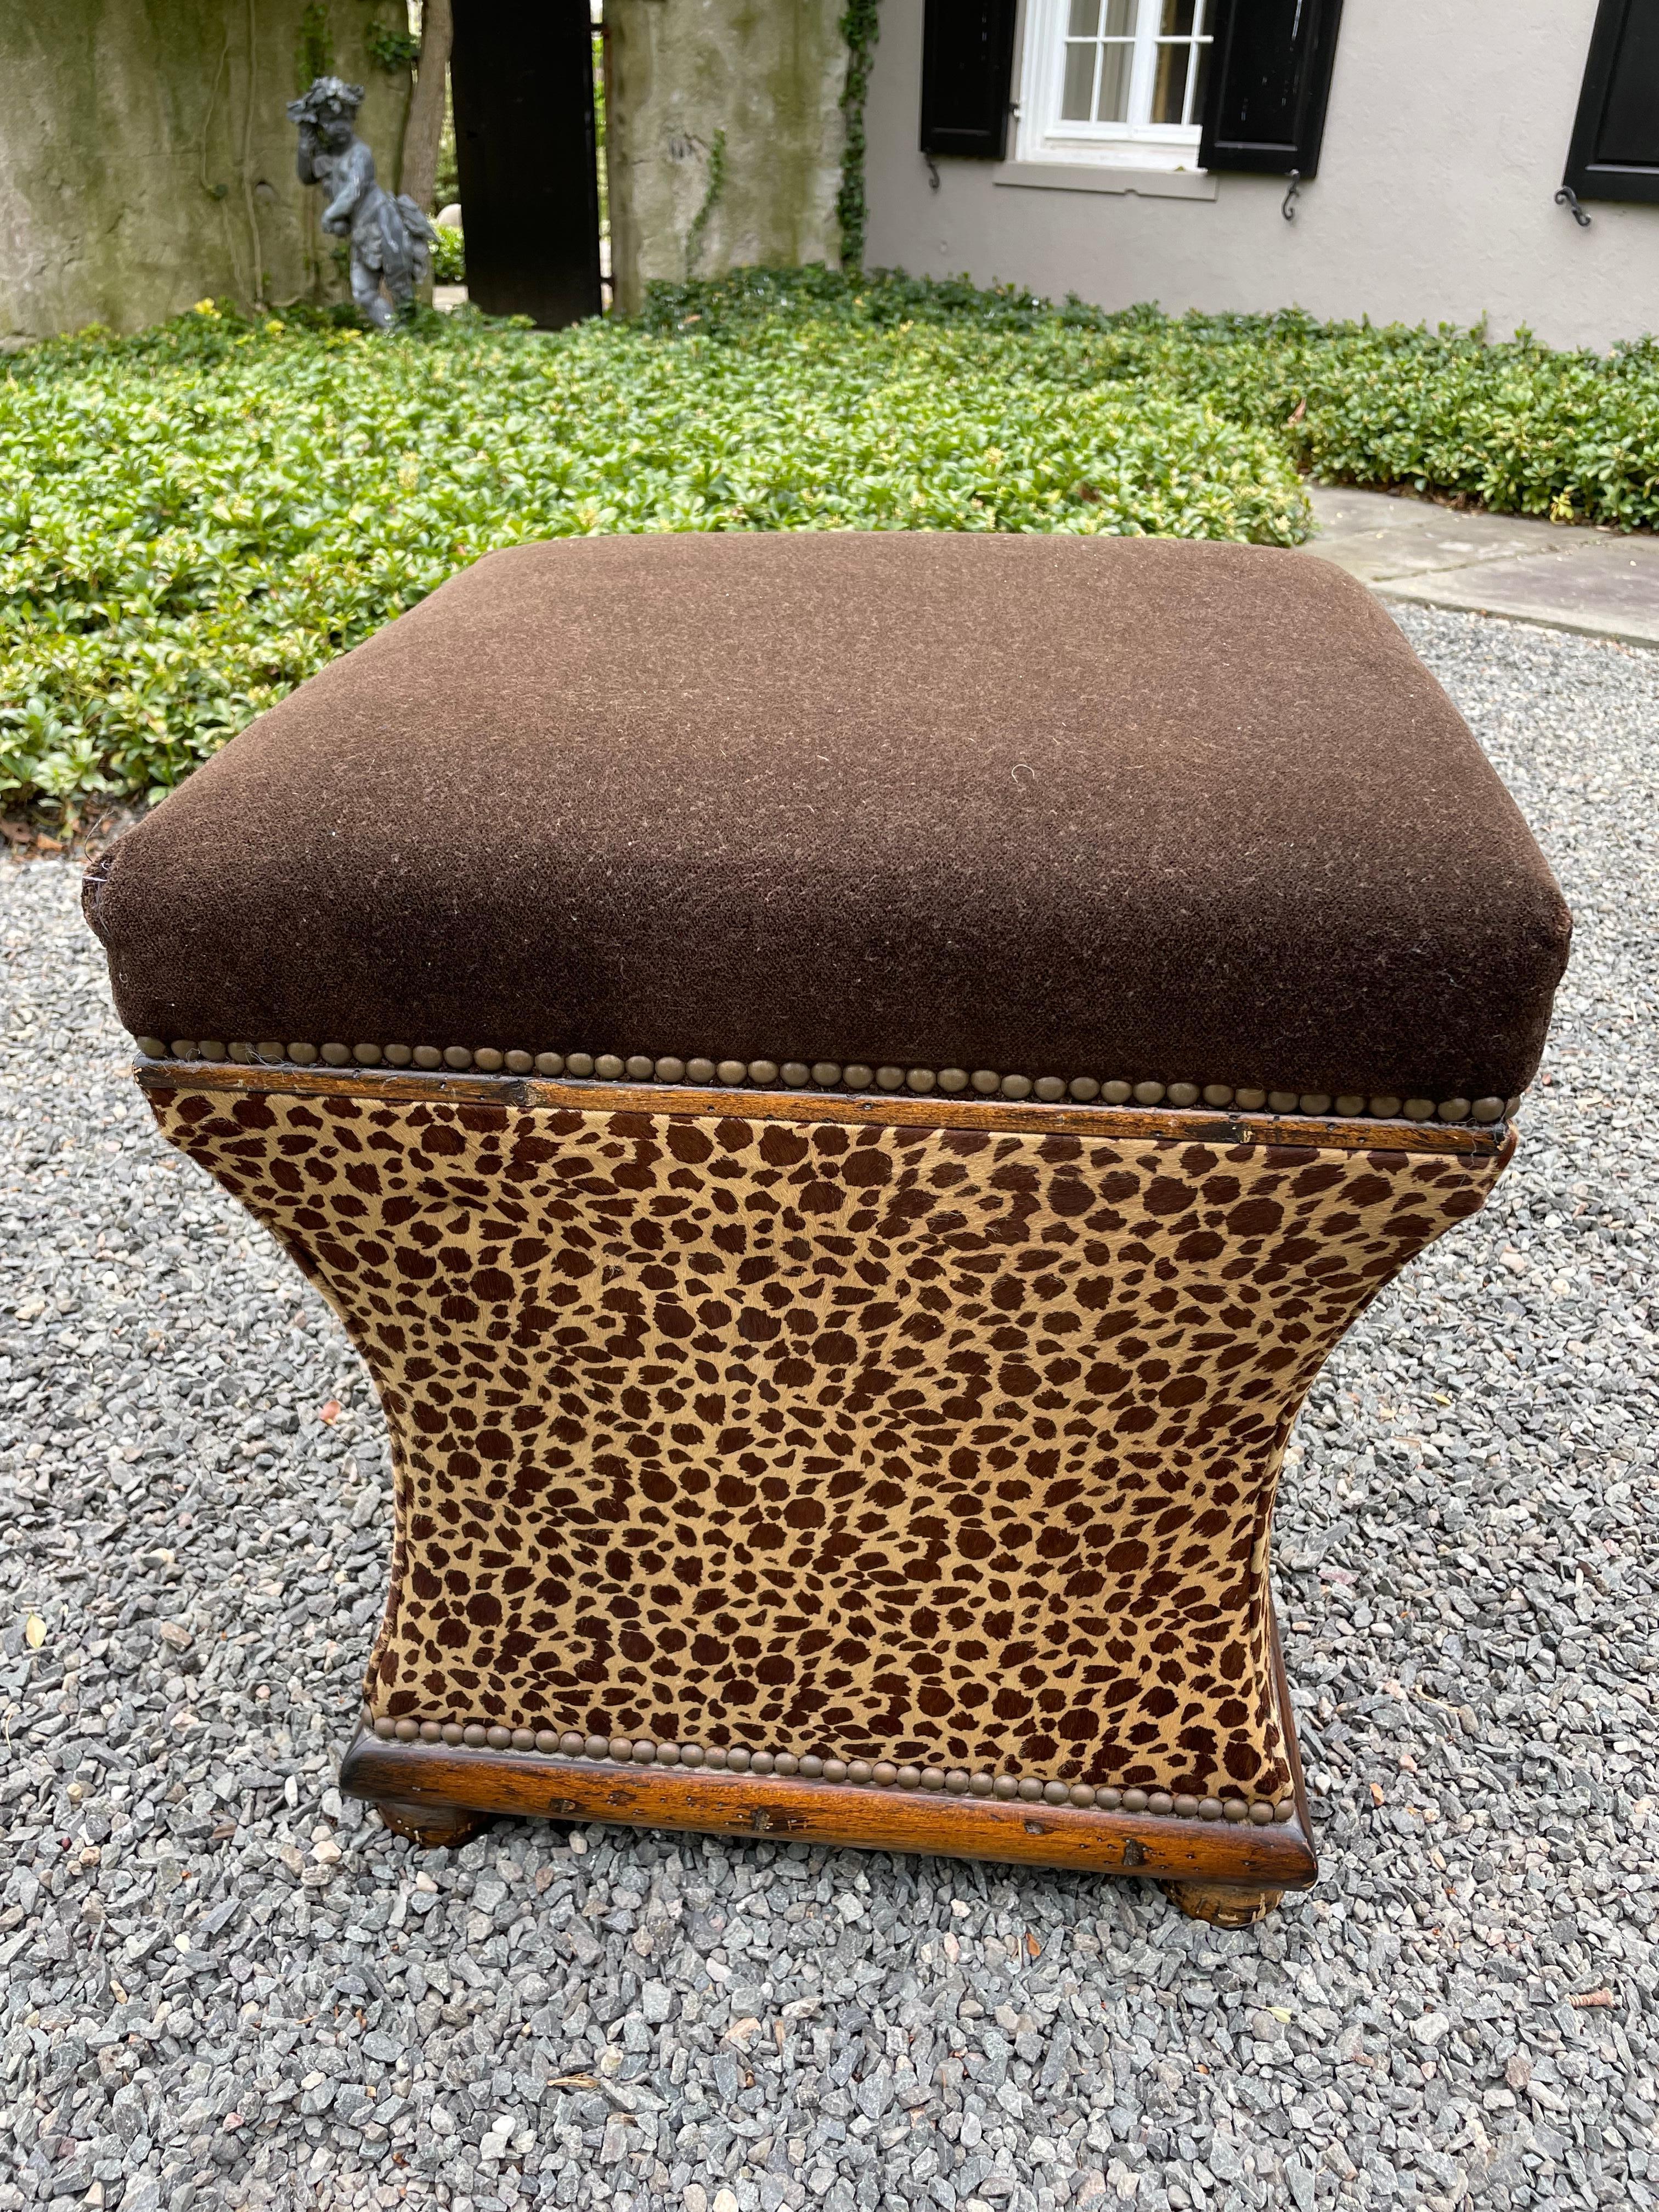 Glamorous pair of animal print ottomans with dark wood bases and bun feet. The tops are plush deep chocolate brown mohair and the bases are cowhide animal print with French brass nailhead trim.